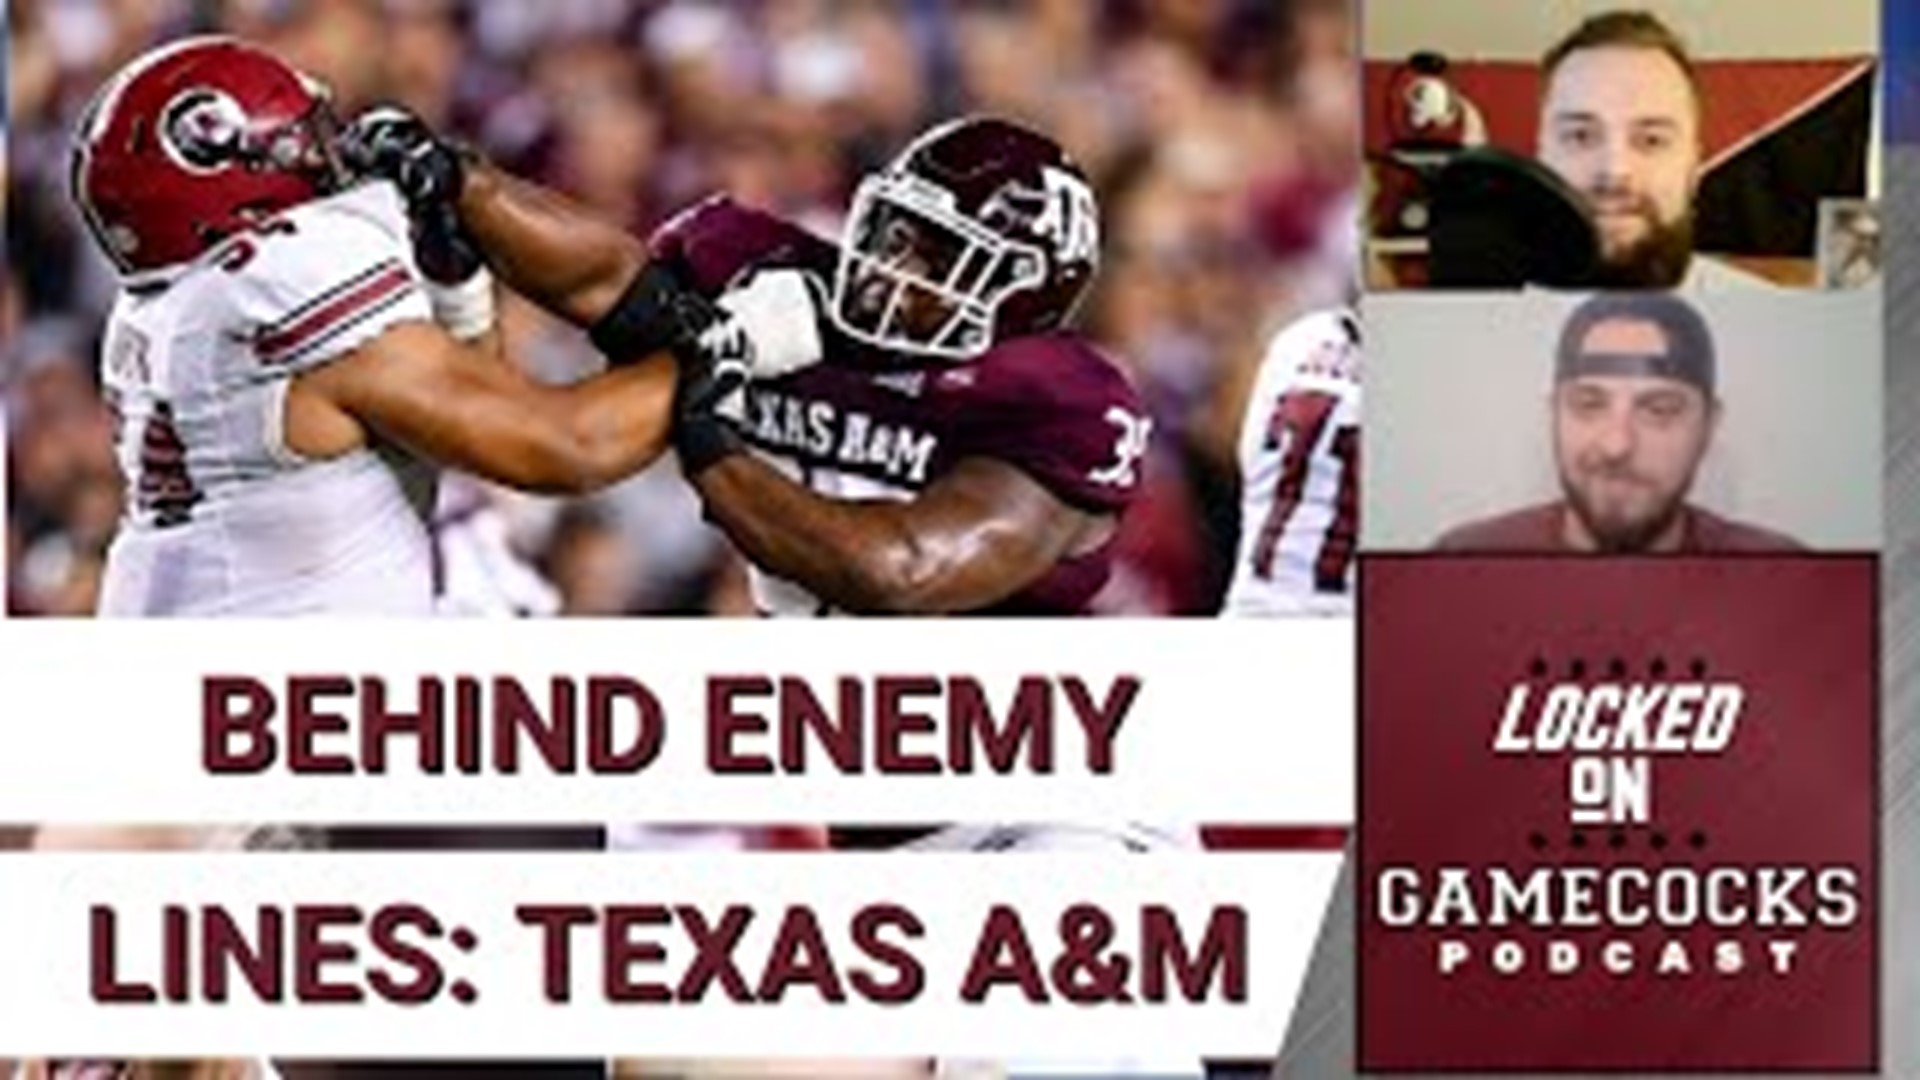 Andrew the big storylines, key matchups and final prediction for a pivotal game between Shane Beamer's South Carolina Gamecocks and Jimbo Fisher's Texas A&M.